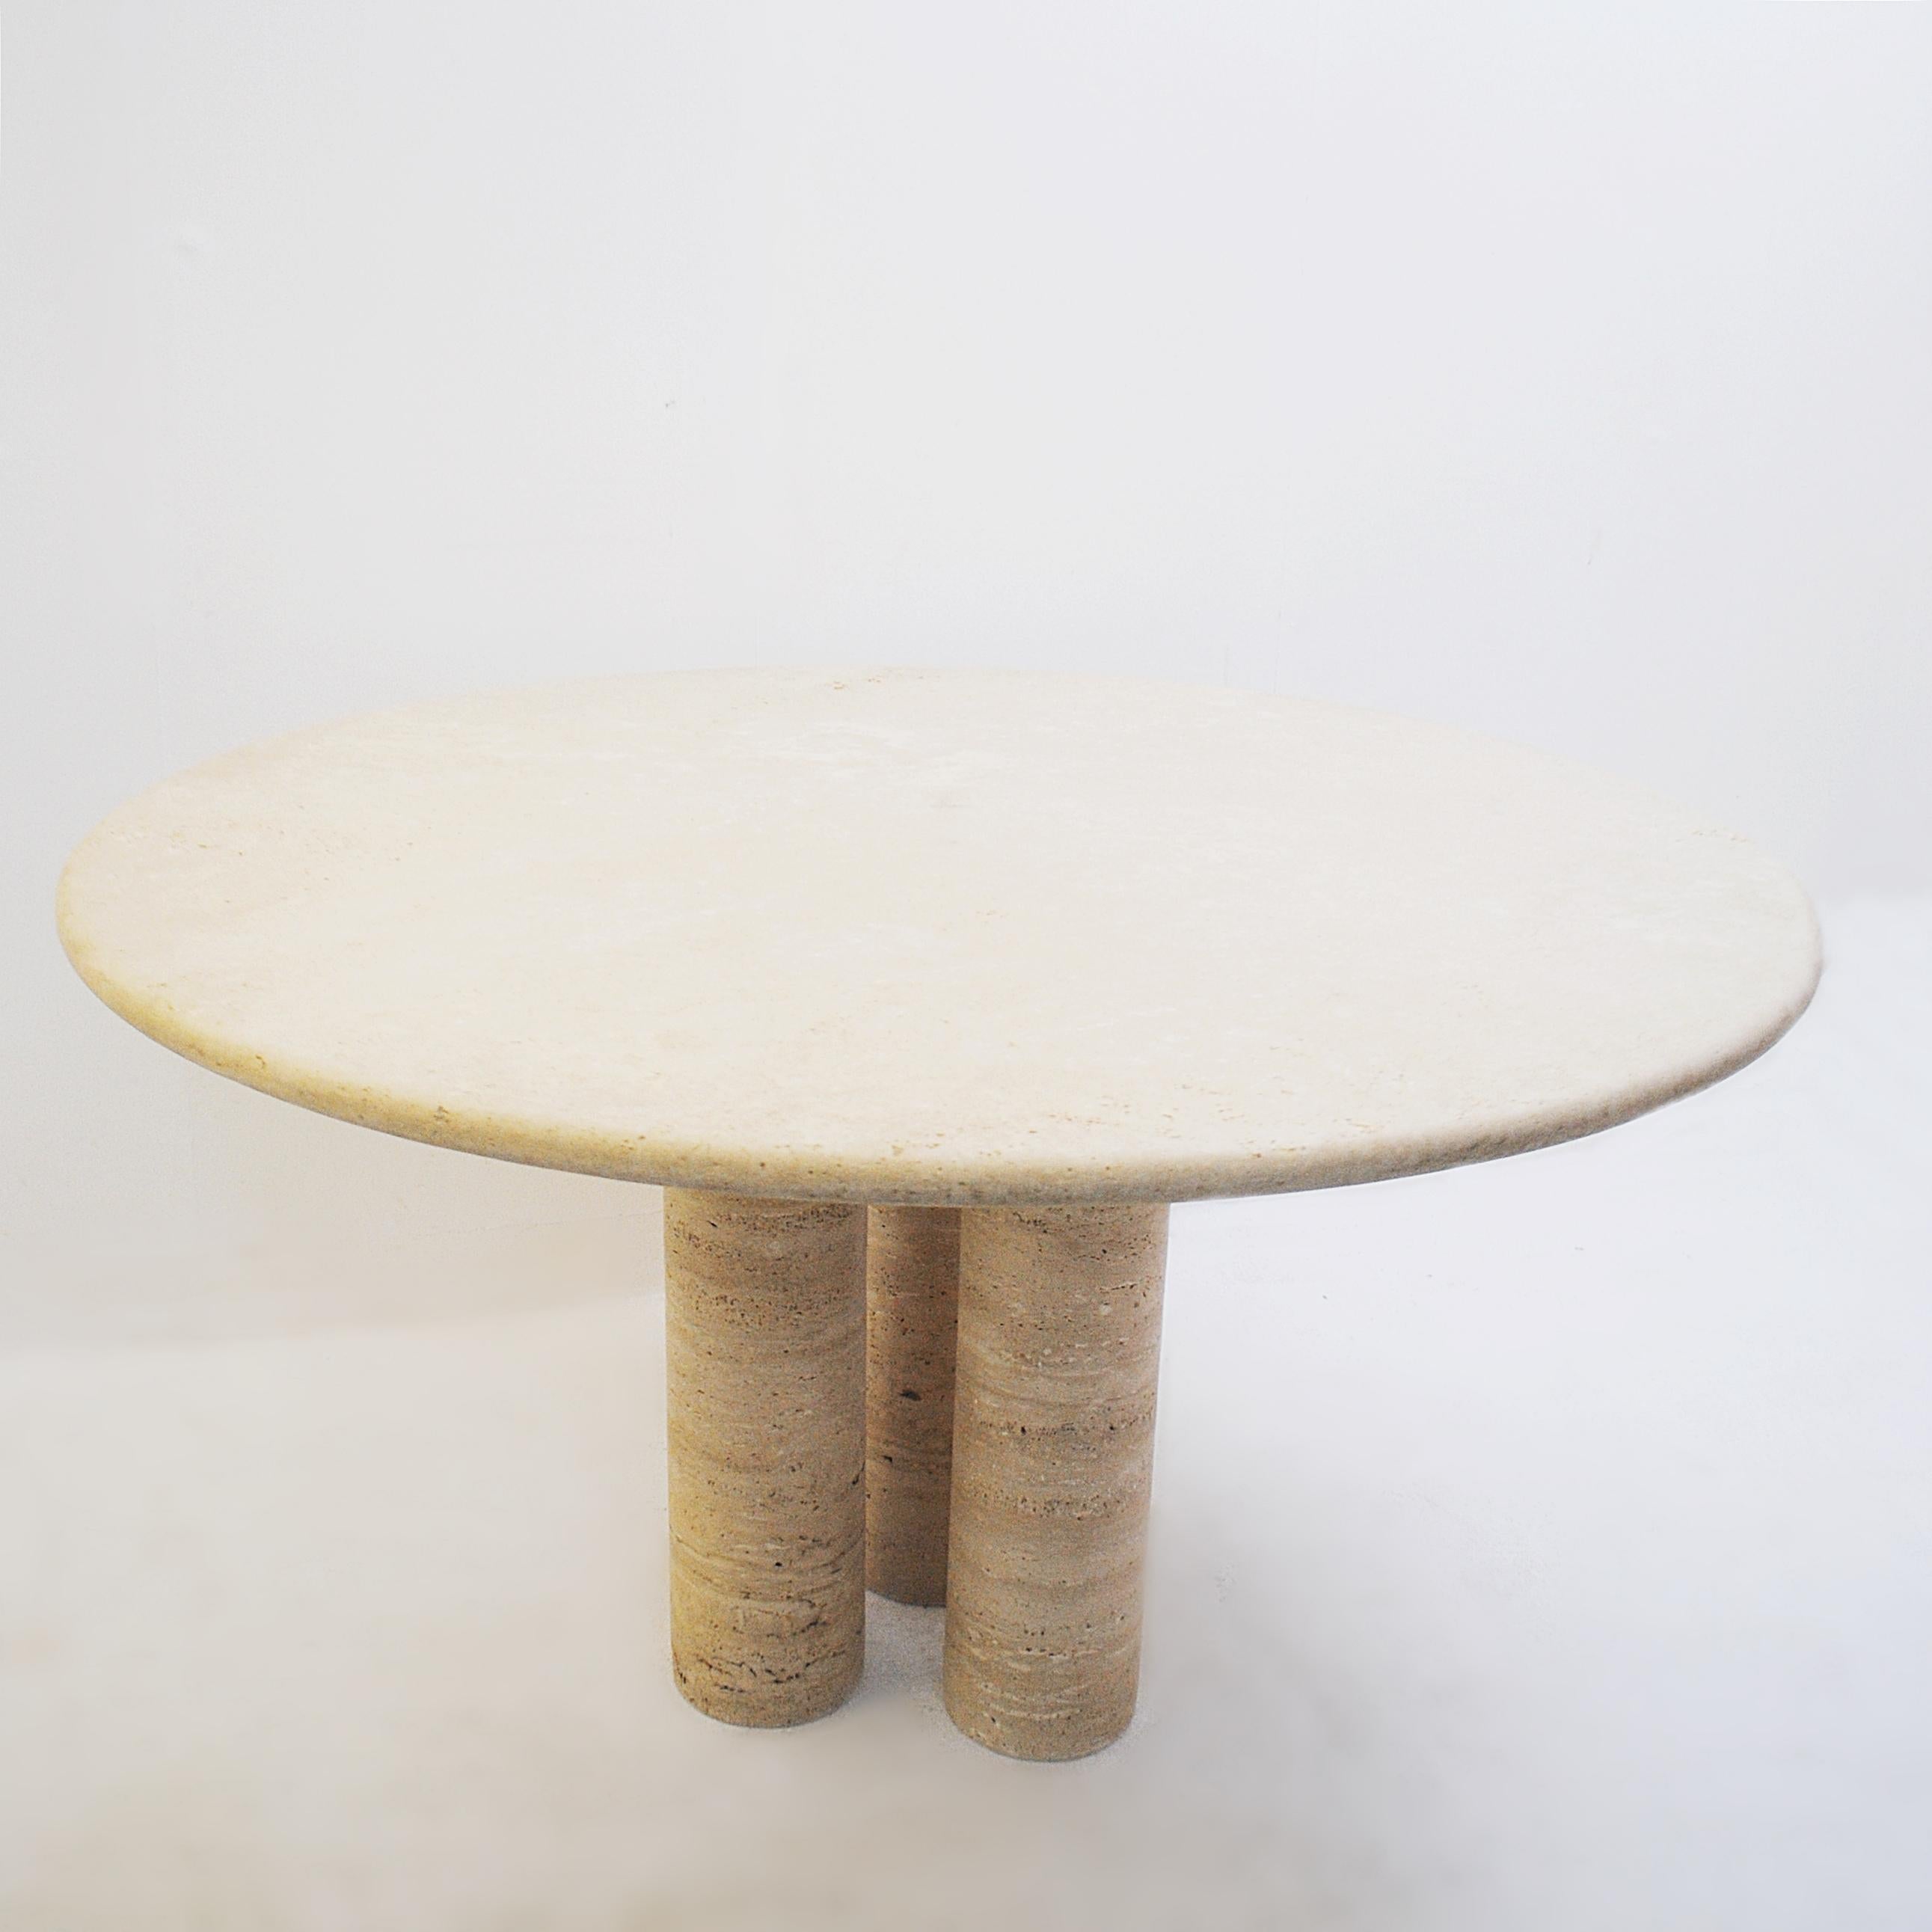 Round dining table in Travertine by Mario Bellini, Italy 1970s.